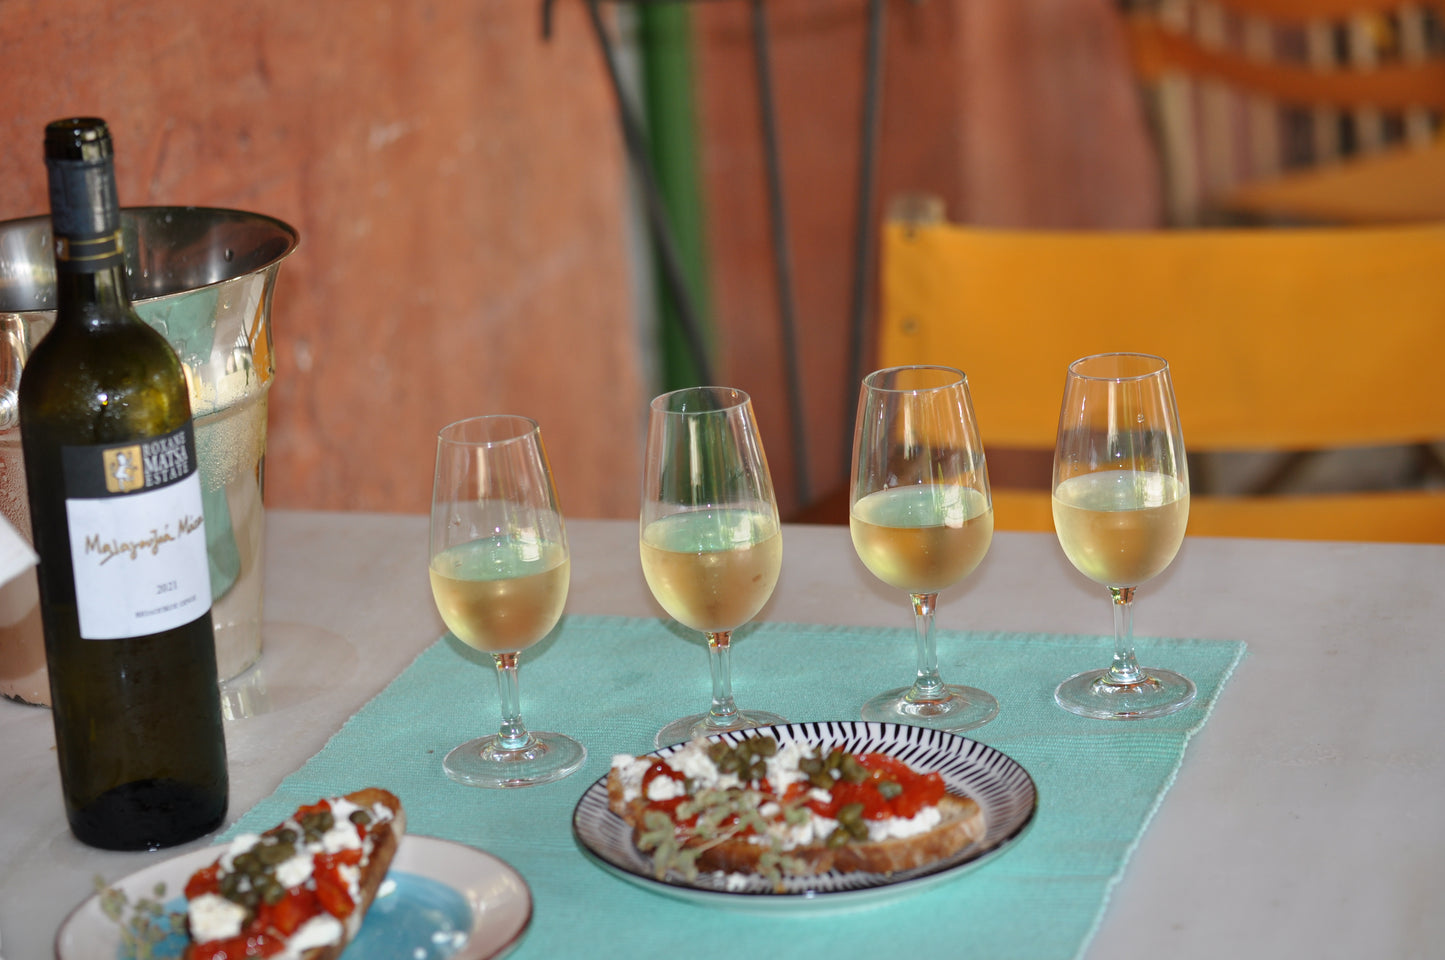 Vineyard Tour and Wine Tasting with Greek Meze